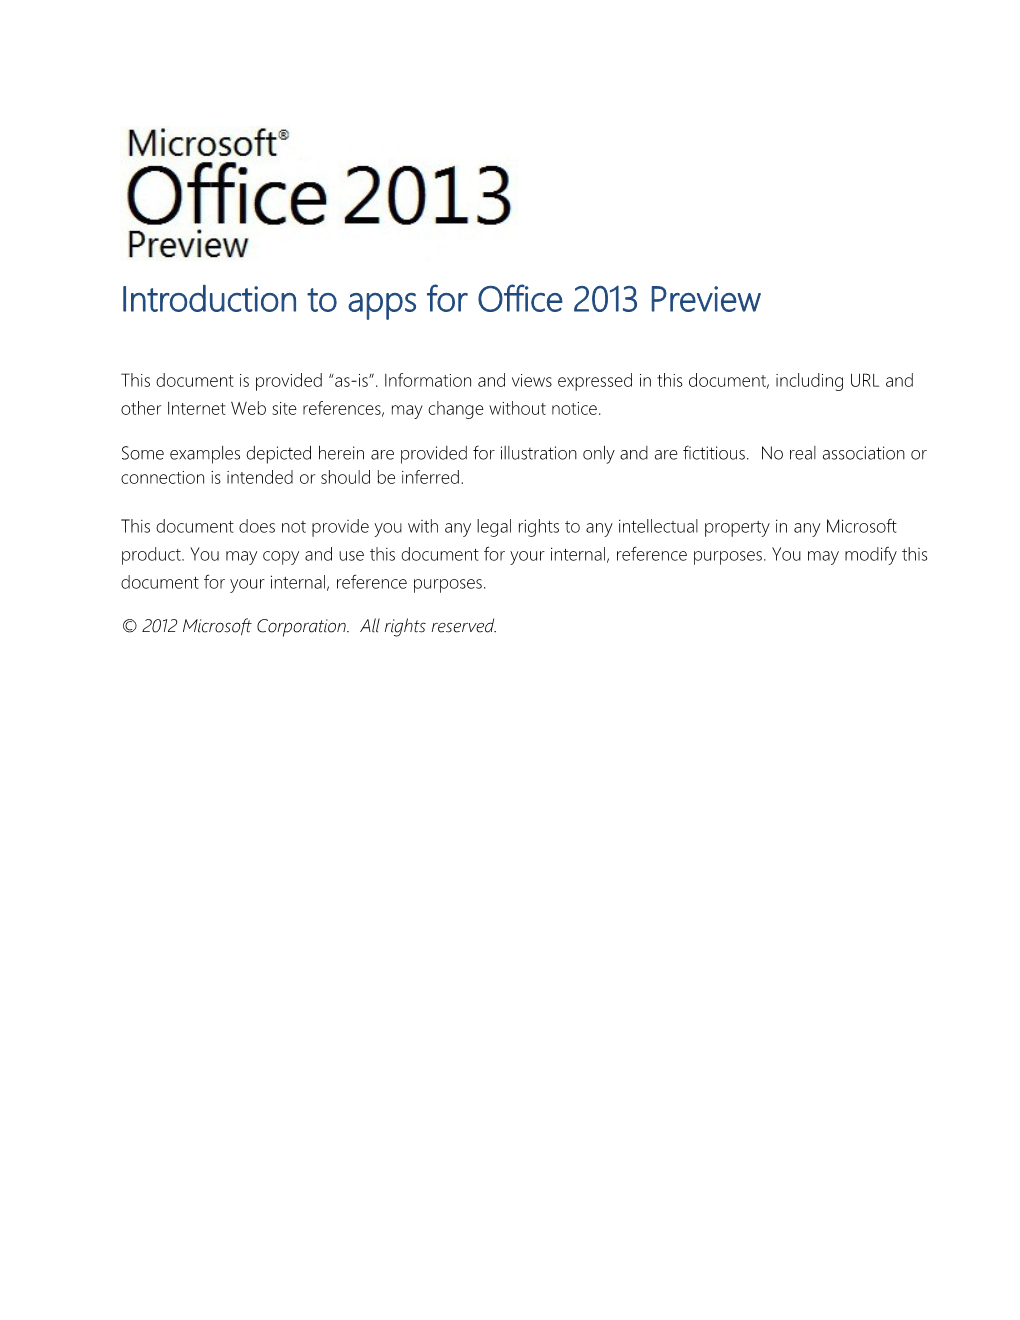 Introduction to Apps for Office 2013 Preview